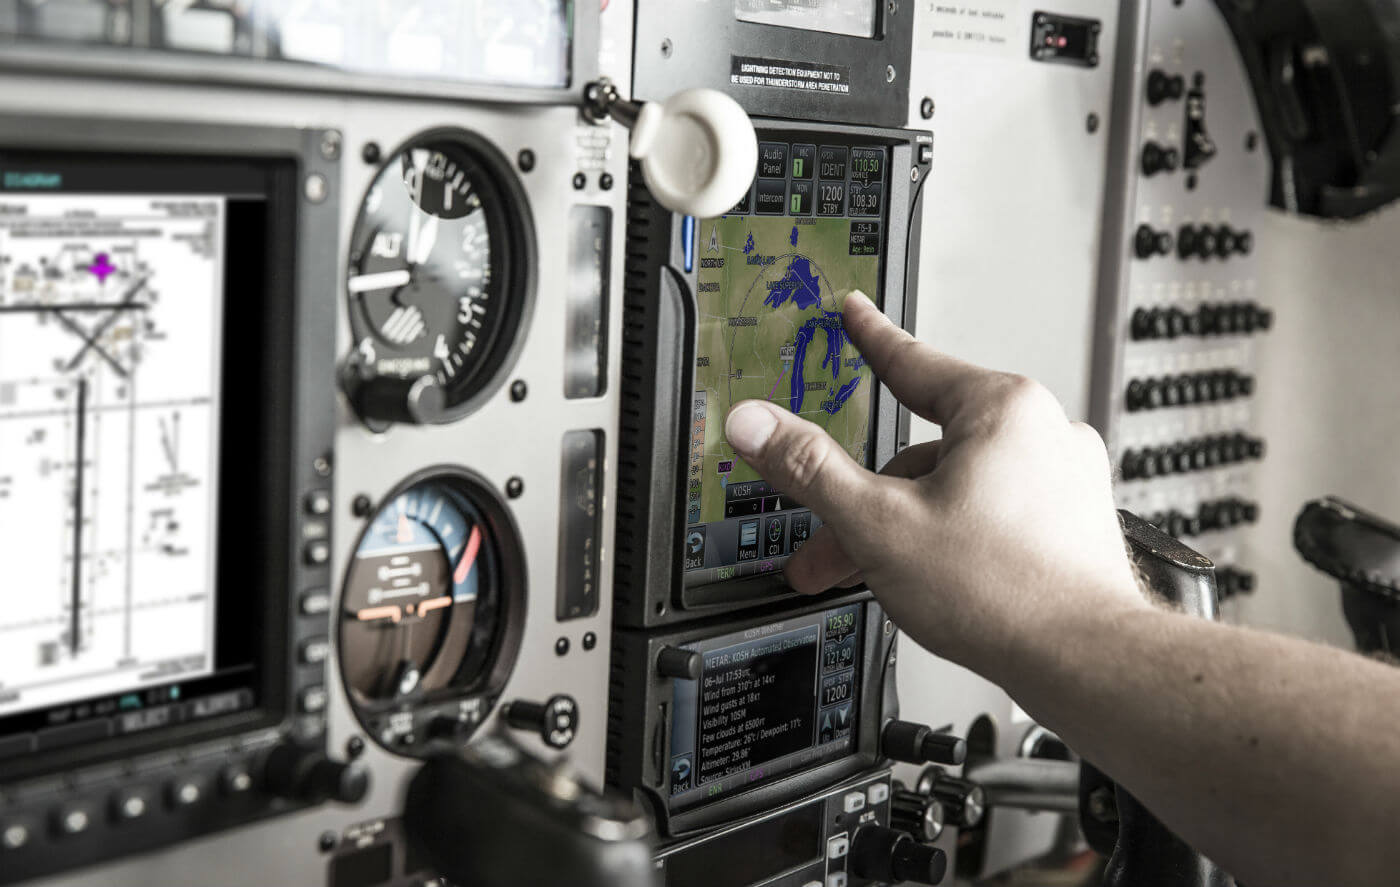 New GTN enhancements include pinch-to-zoom and Flight Stream 510 integration, which supports wireless Database Concierge between the GTN and the Garmin Pilot app on a mobile device. Garmin Photo